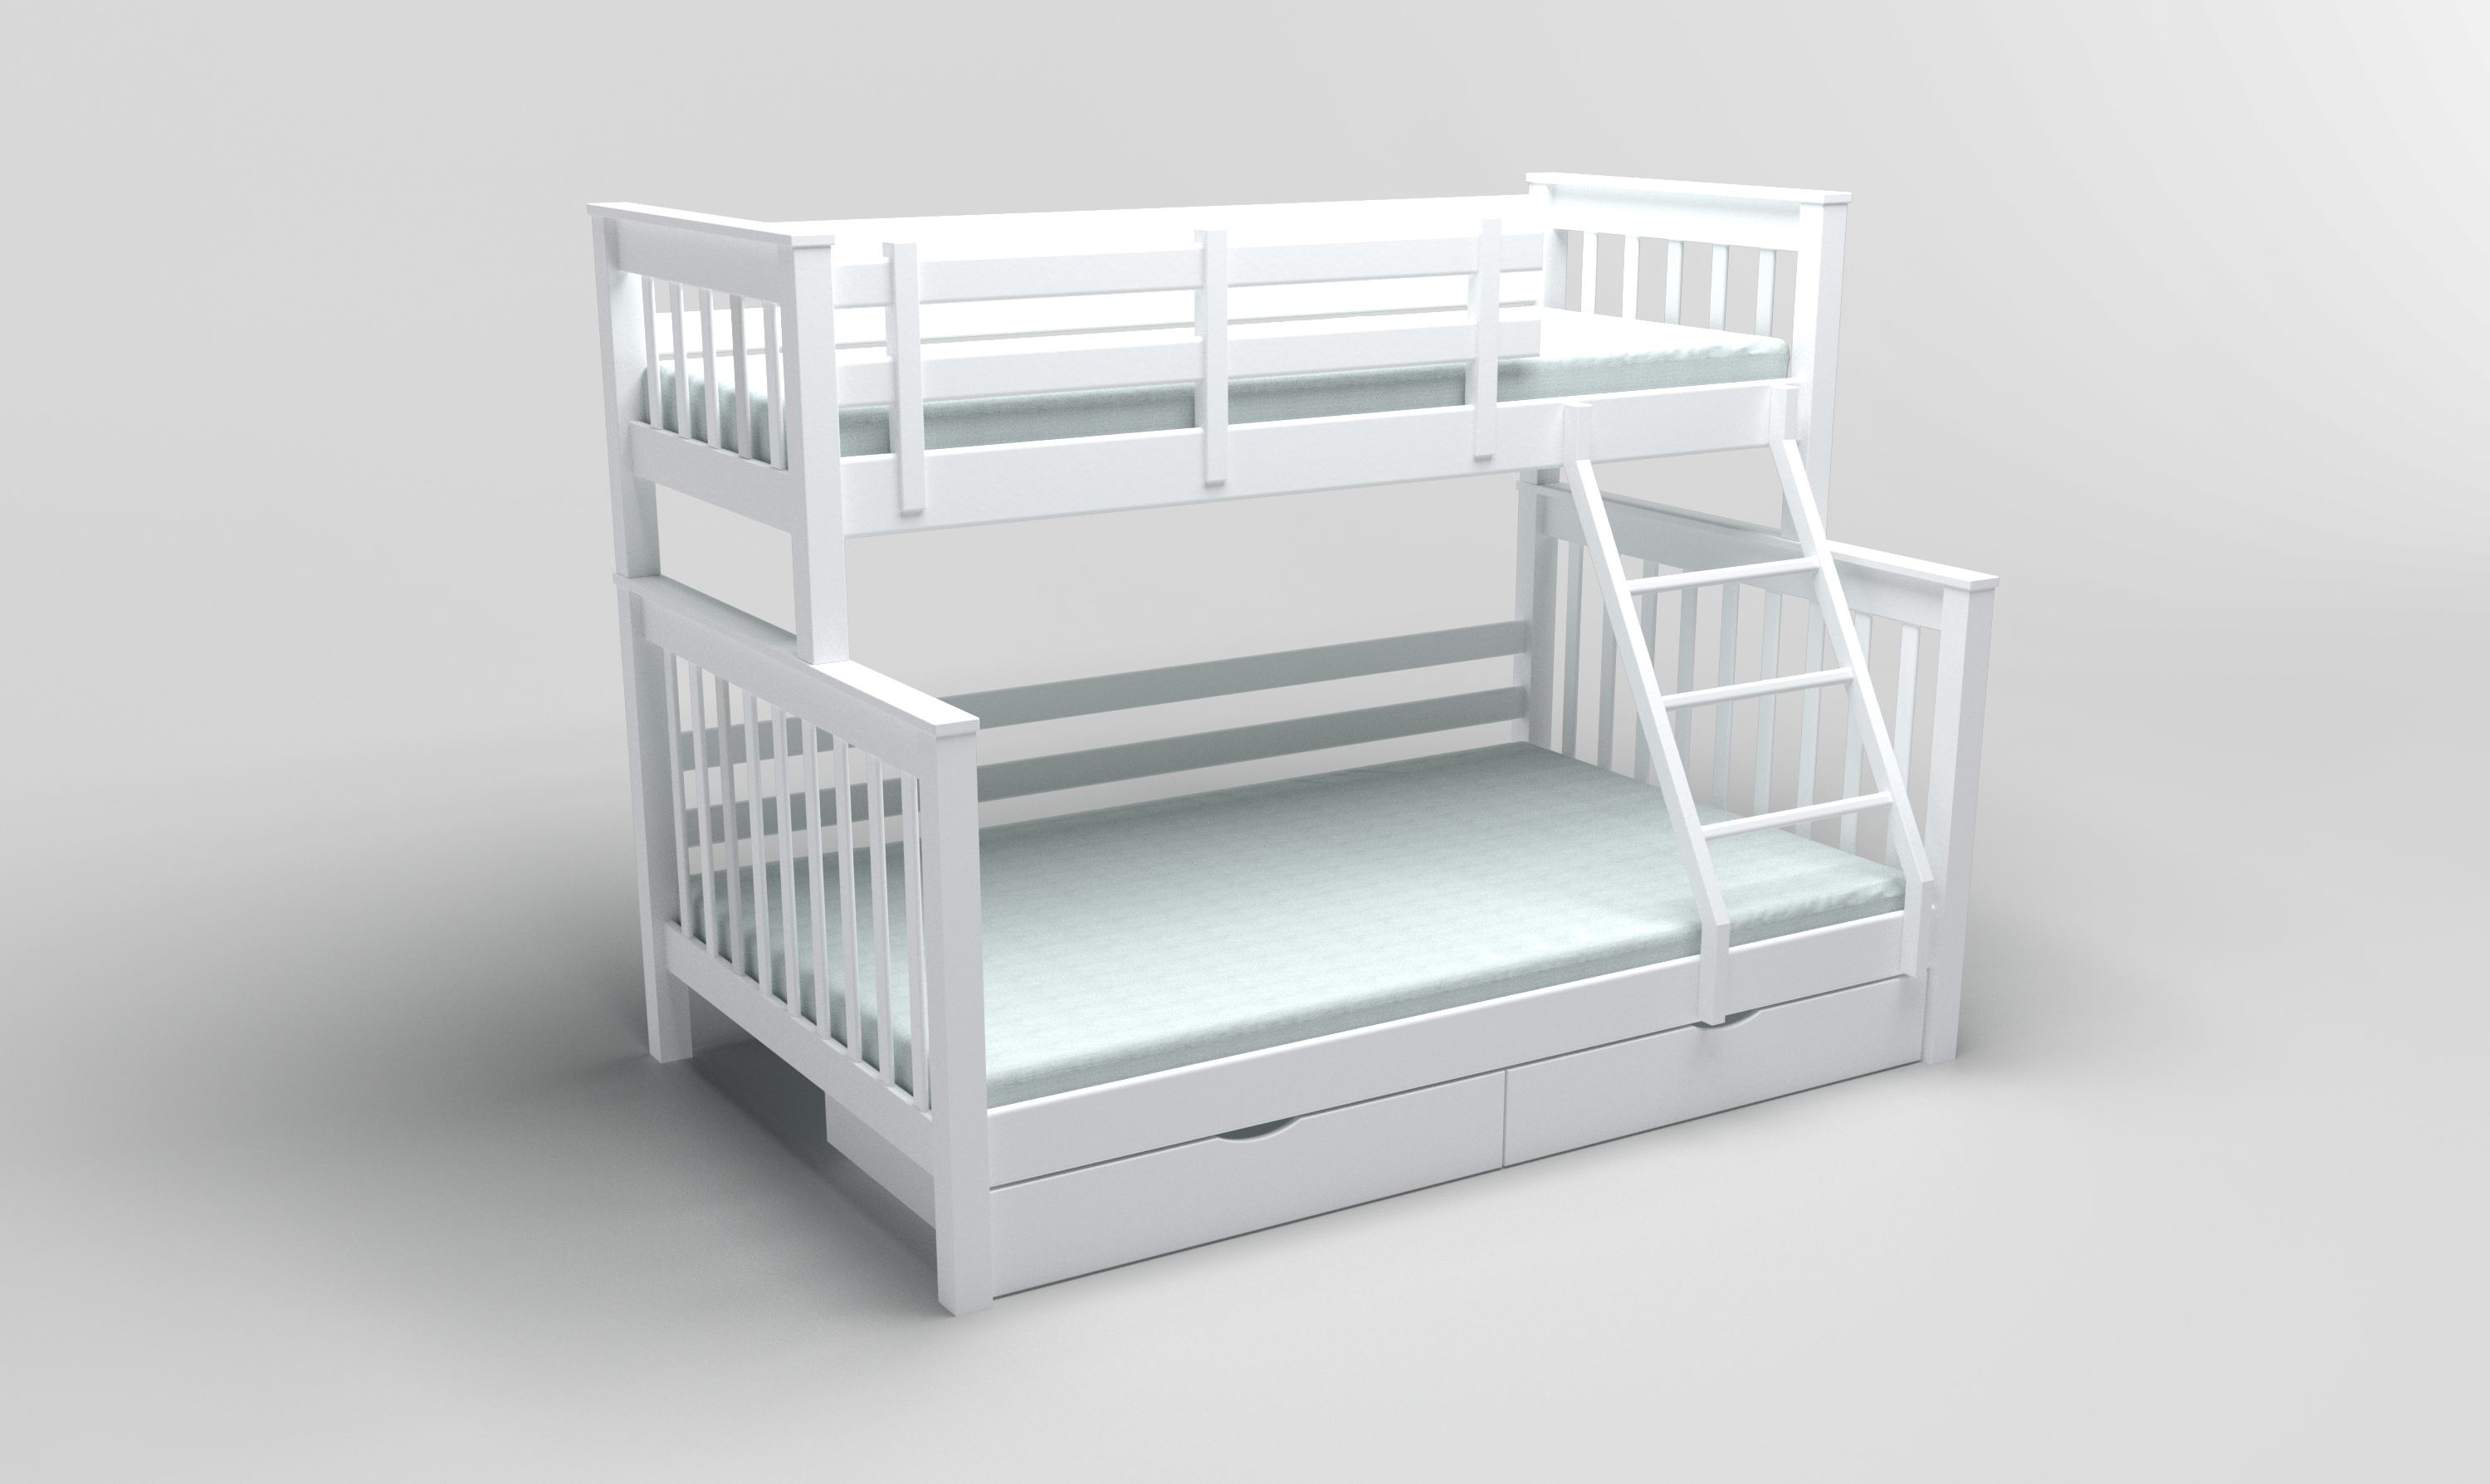 Children's 2-story bed in 3d max vray 3.0 image